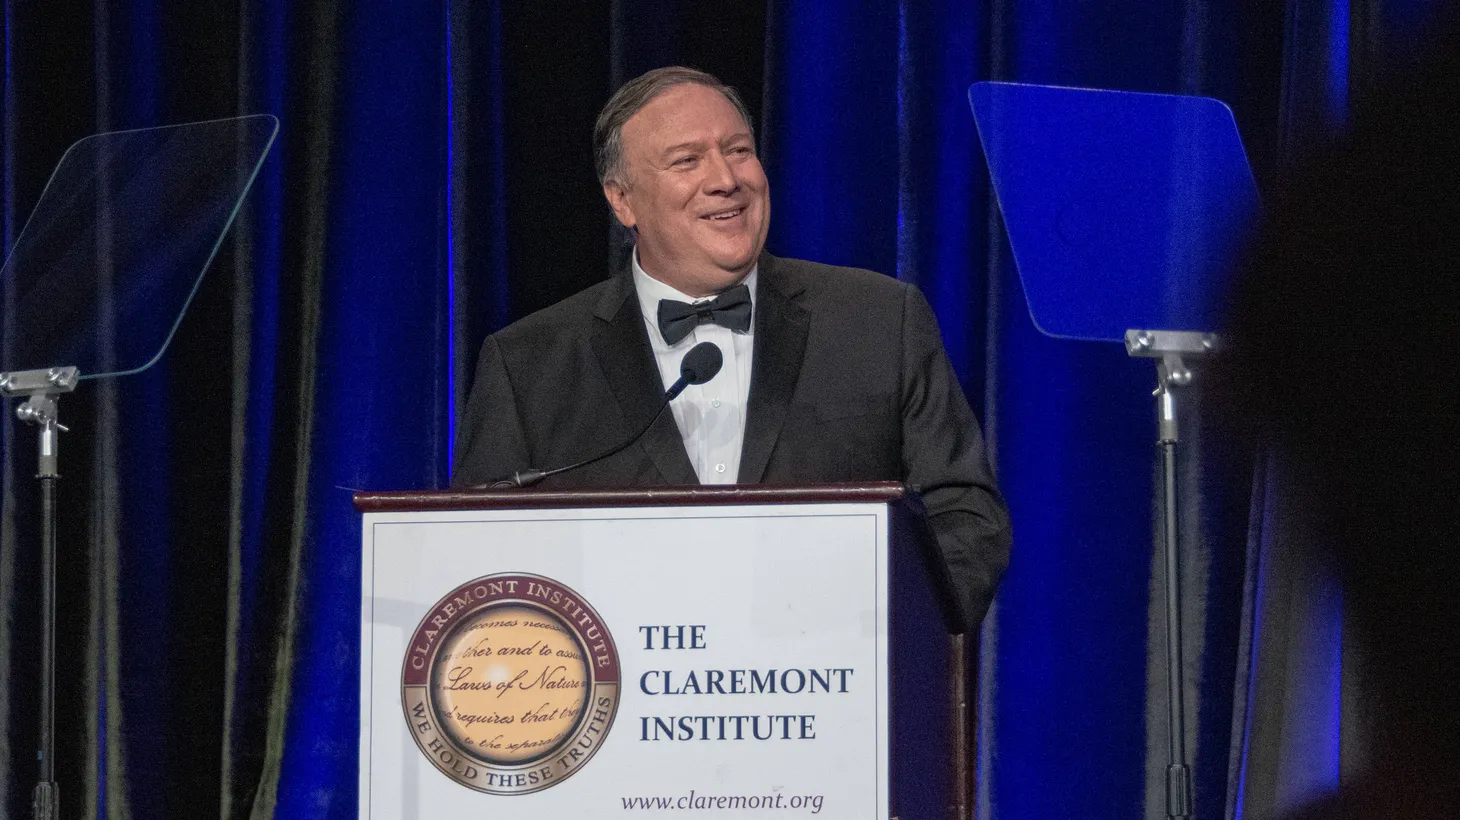 U.S. Secretary of State Michael R. Pompeo delivers remarks at The Claremont Institute’s 40th Anniversary Gala in Beverly Hills, California, on May 11, 2019.